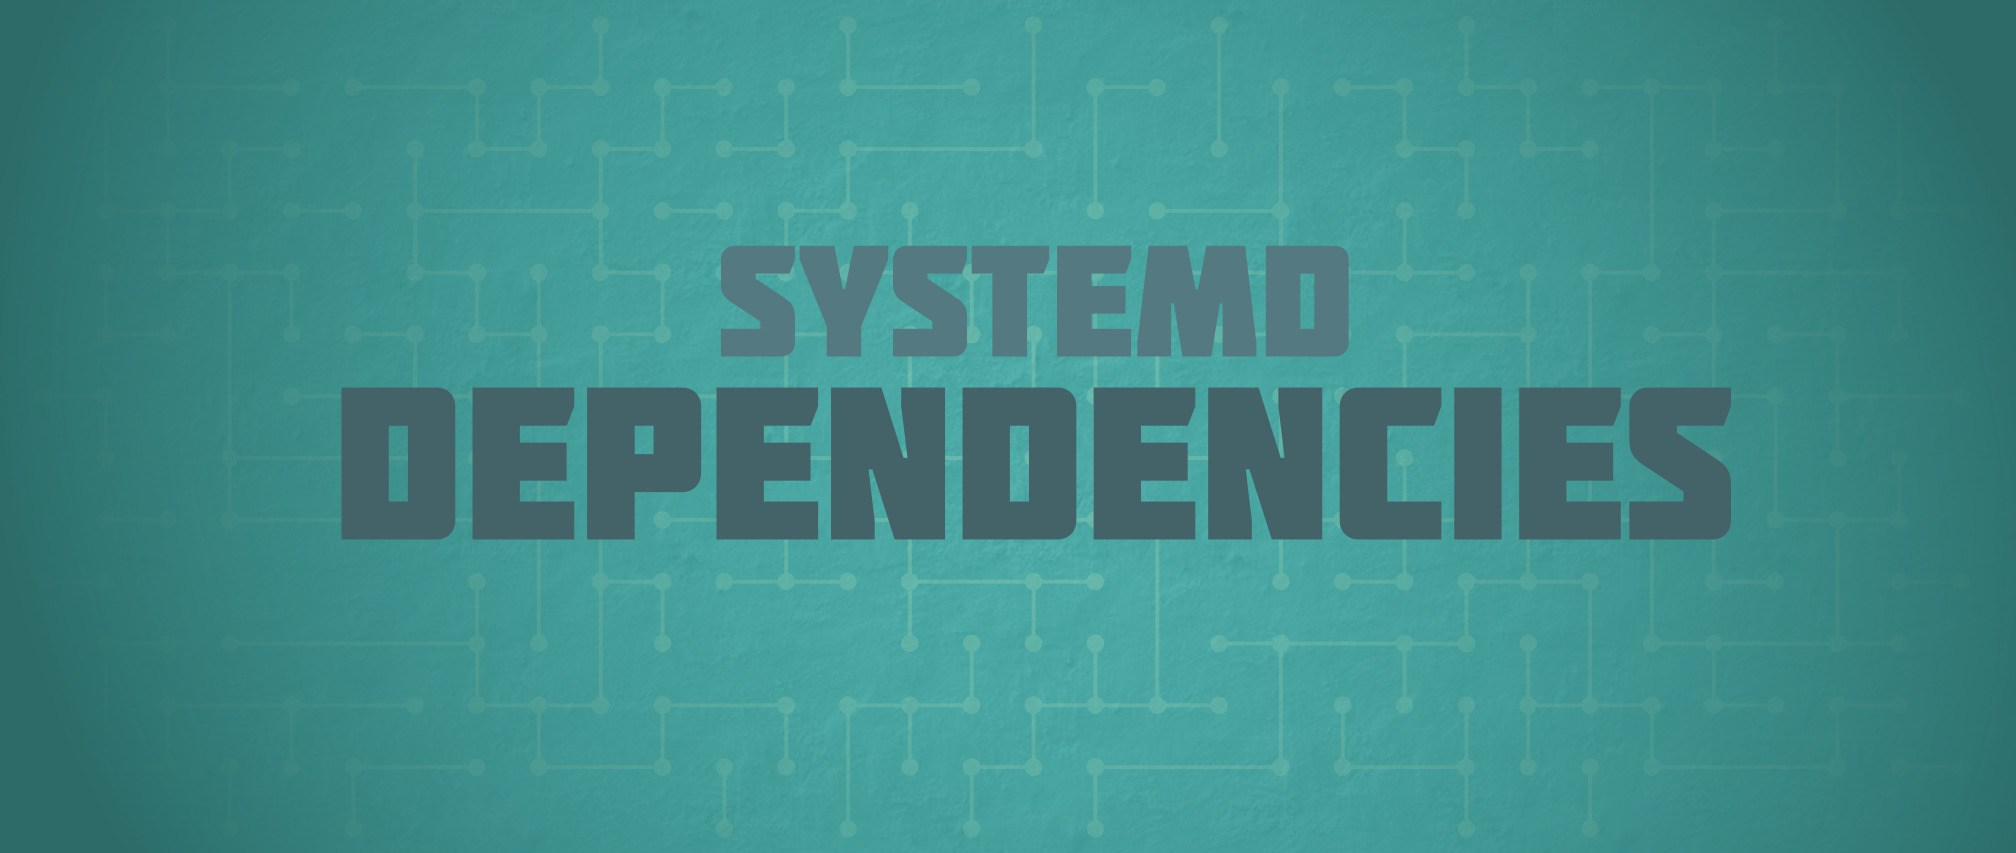 systemd: Unit dependencies and order - Fedora Magazine